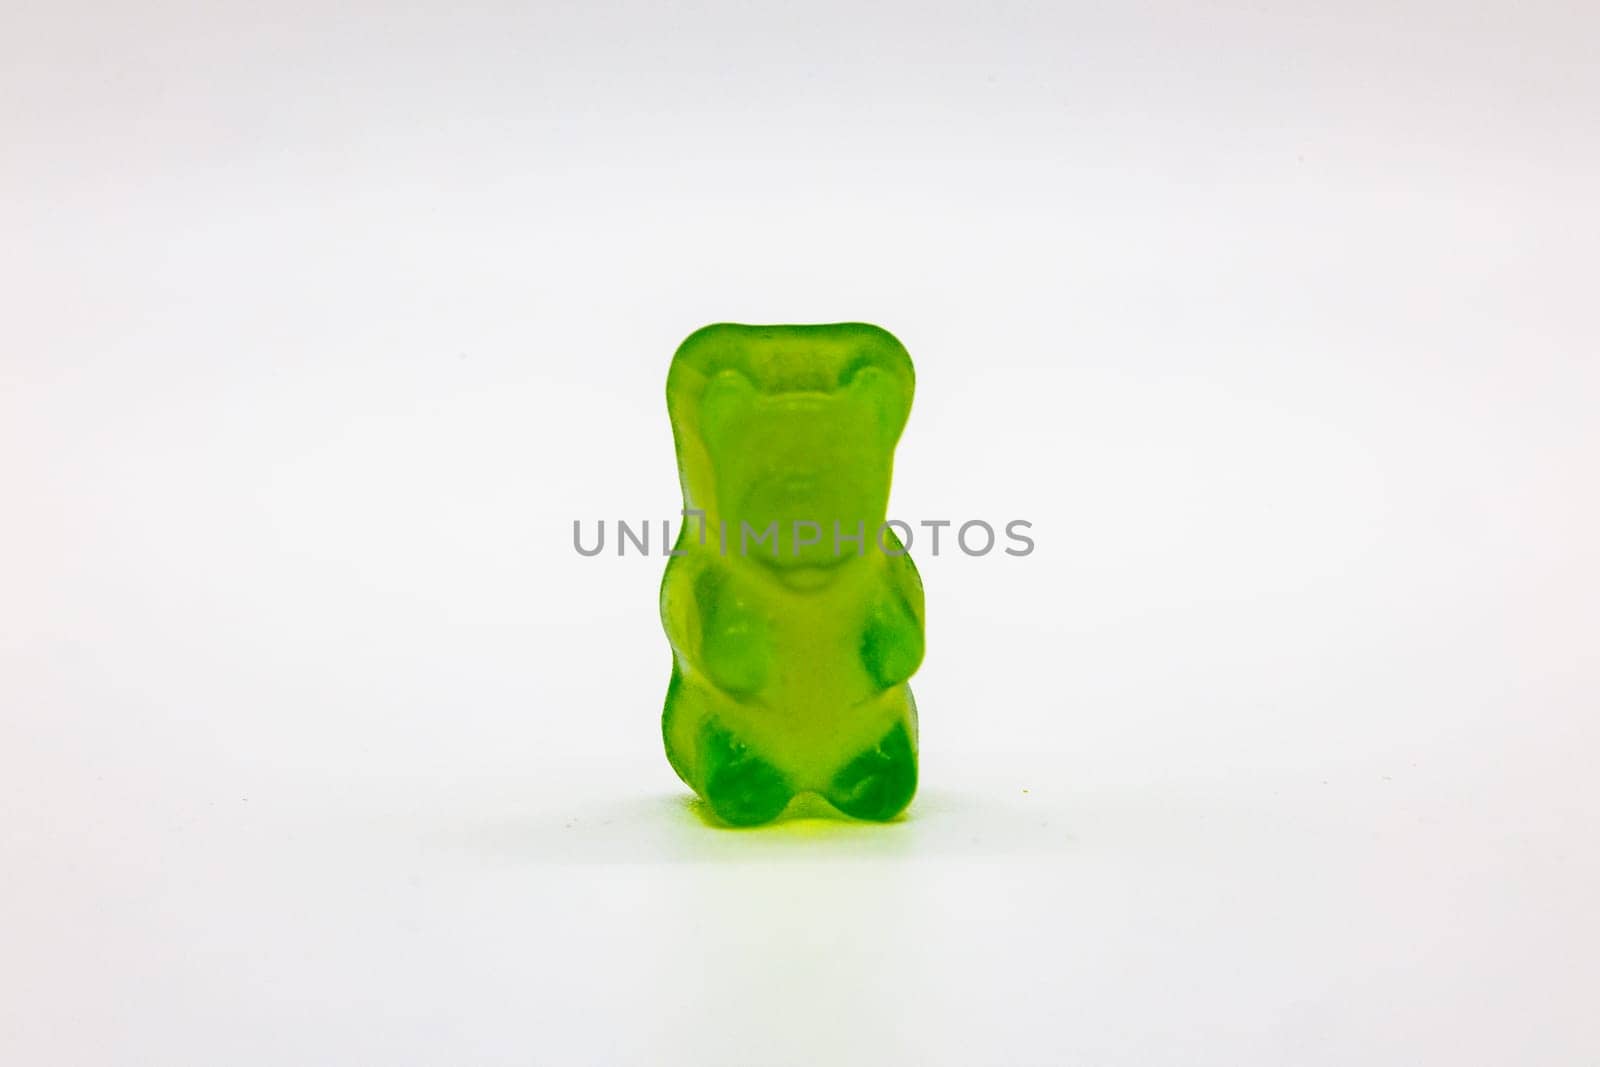 Isolated green gummy bear, sweet snack concept image.